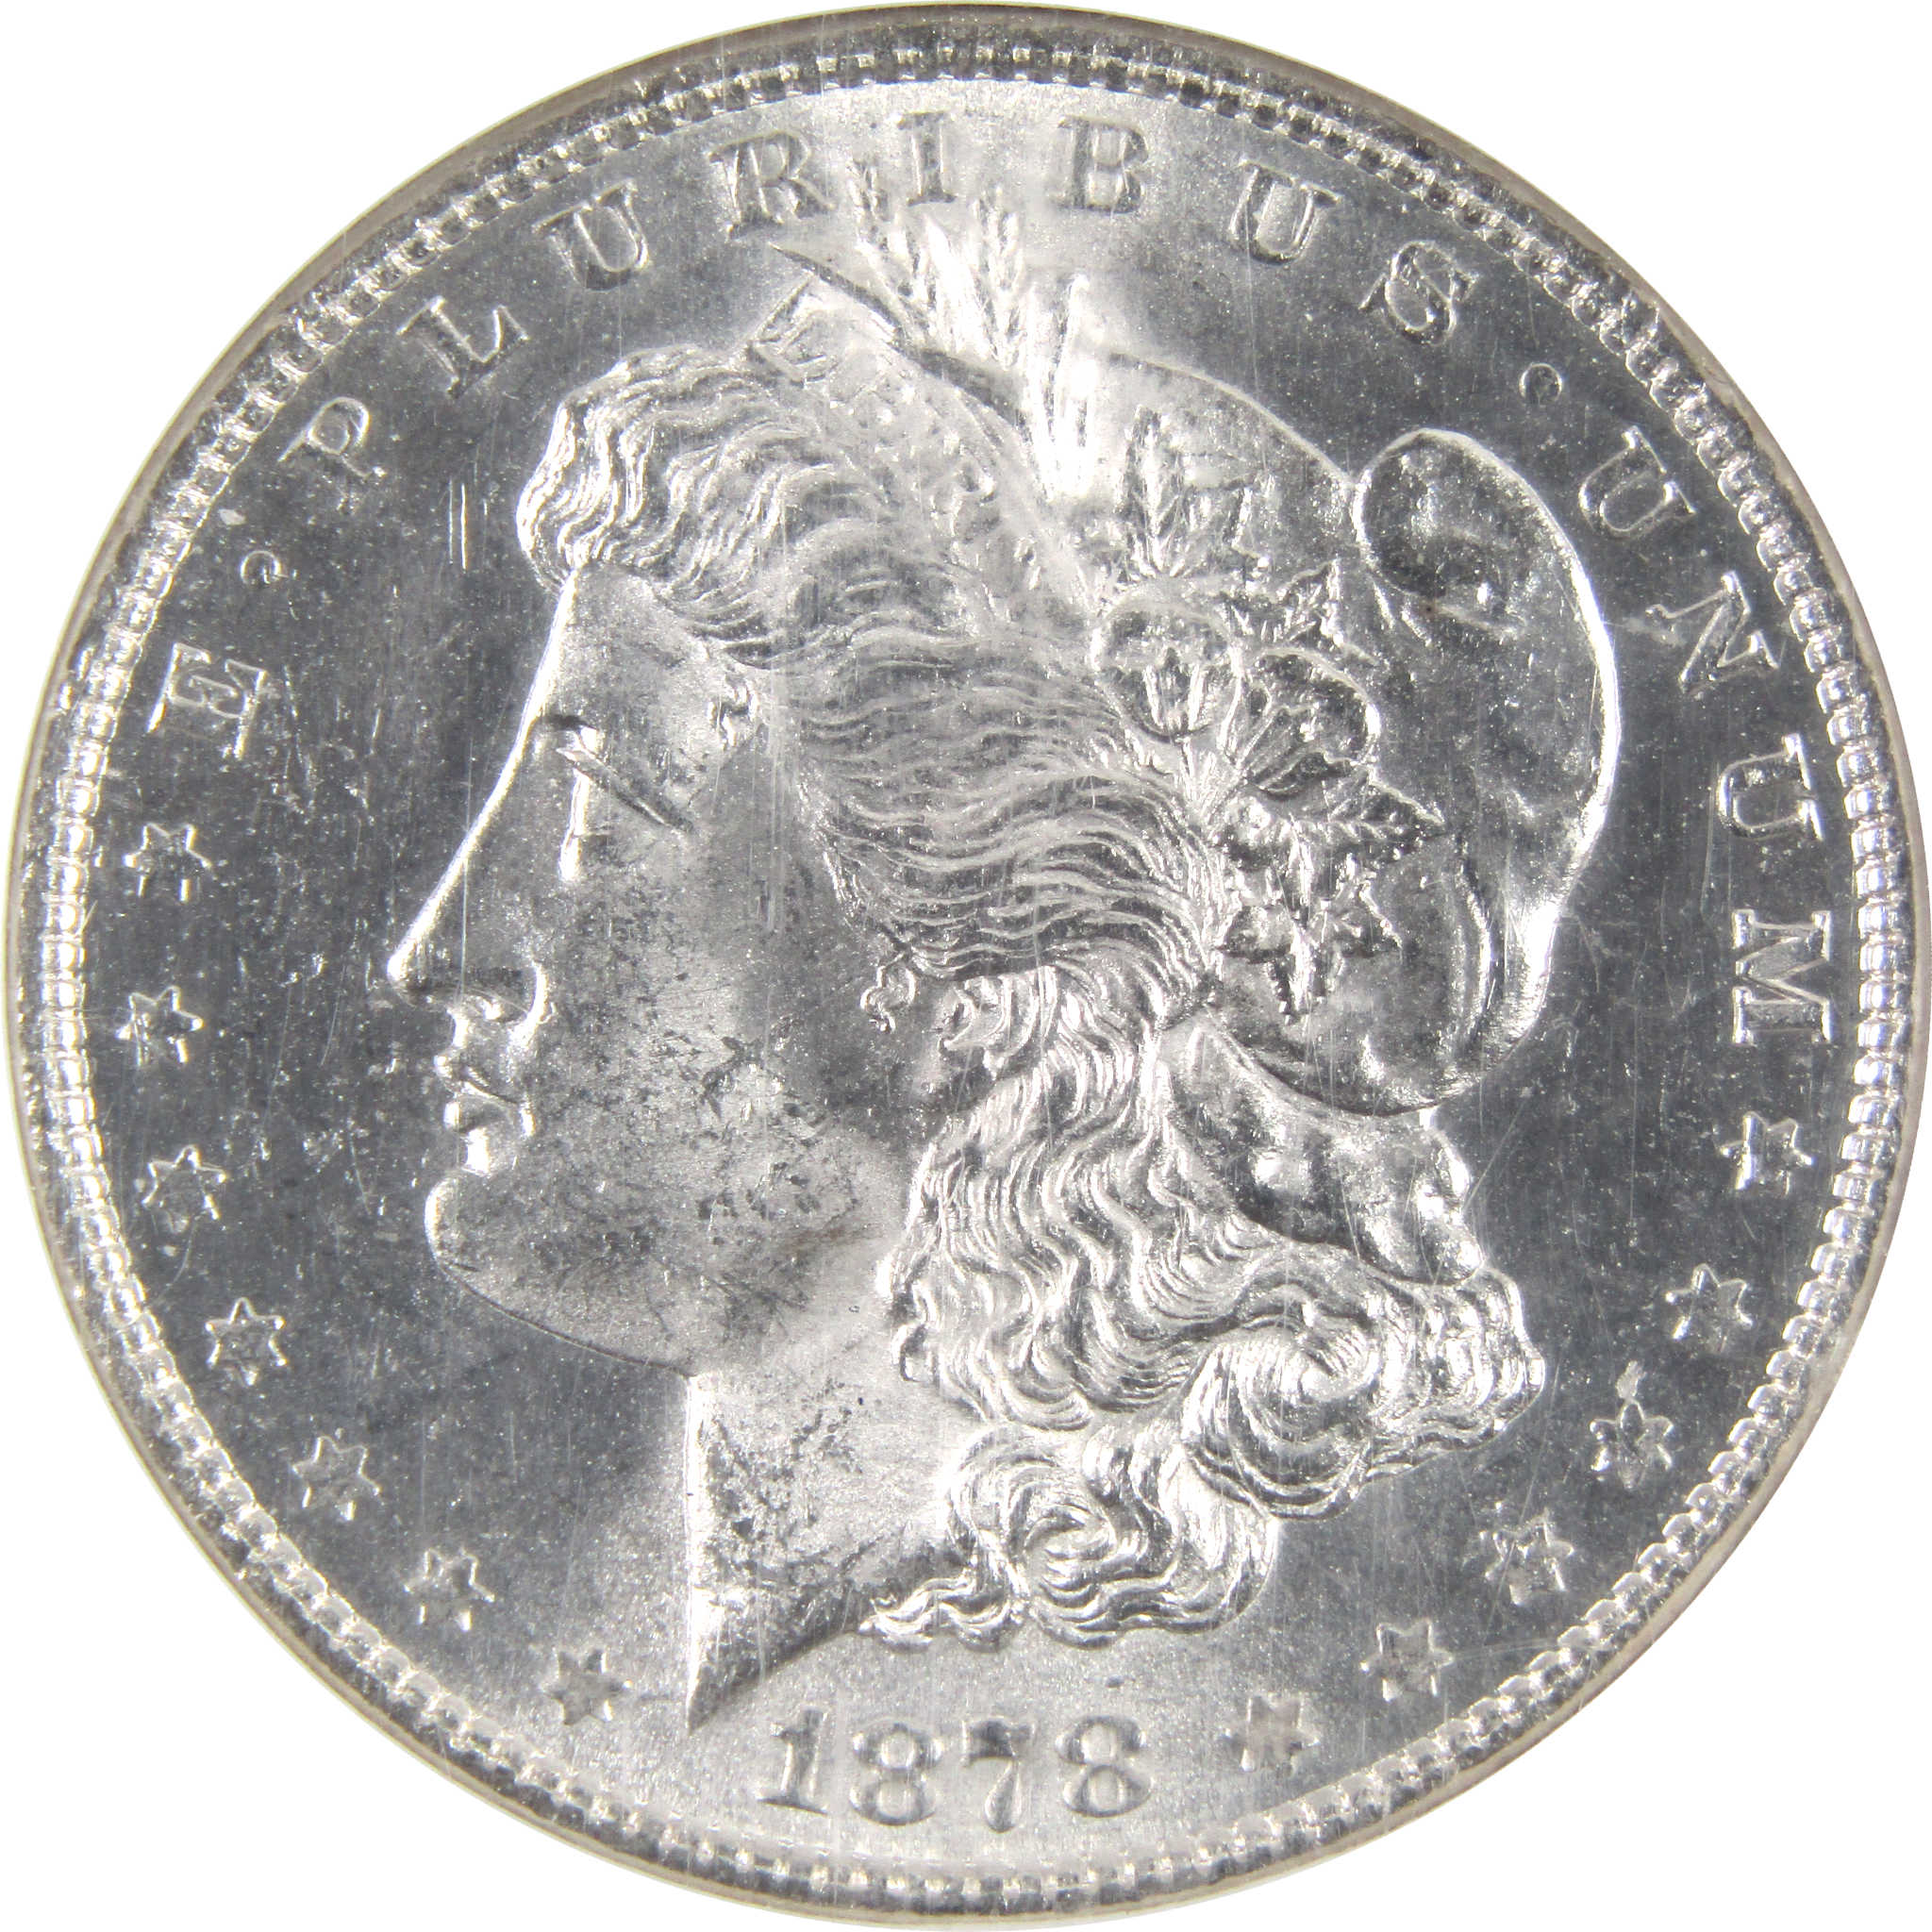 1878 7TF Rev 79 Morgan Dollar MS 62 NGC 90% Silver $1 Unc SKU:I7542 - Morgan coin - Morgan silver dollar - Morgan silver dollar for sale - Profile Coins &amp; Collectibles